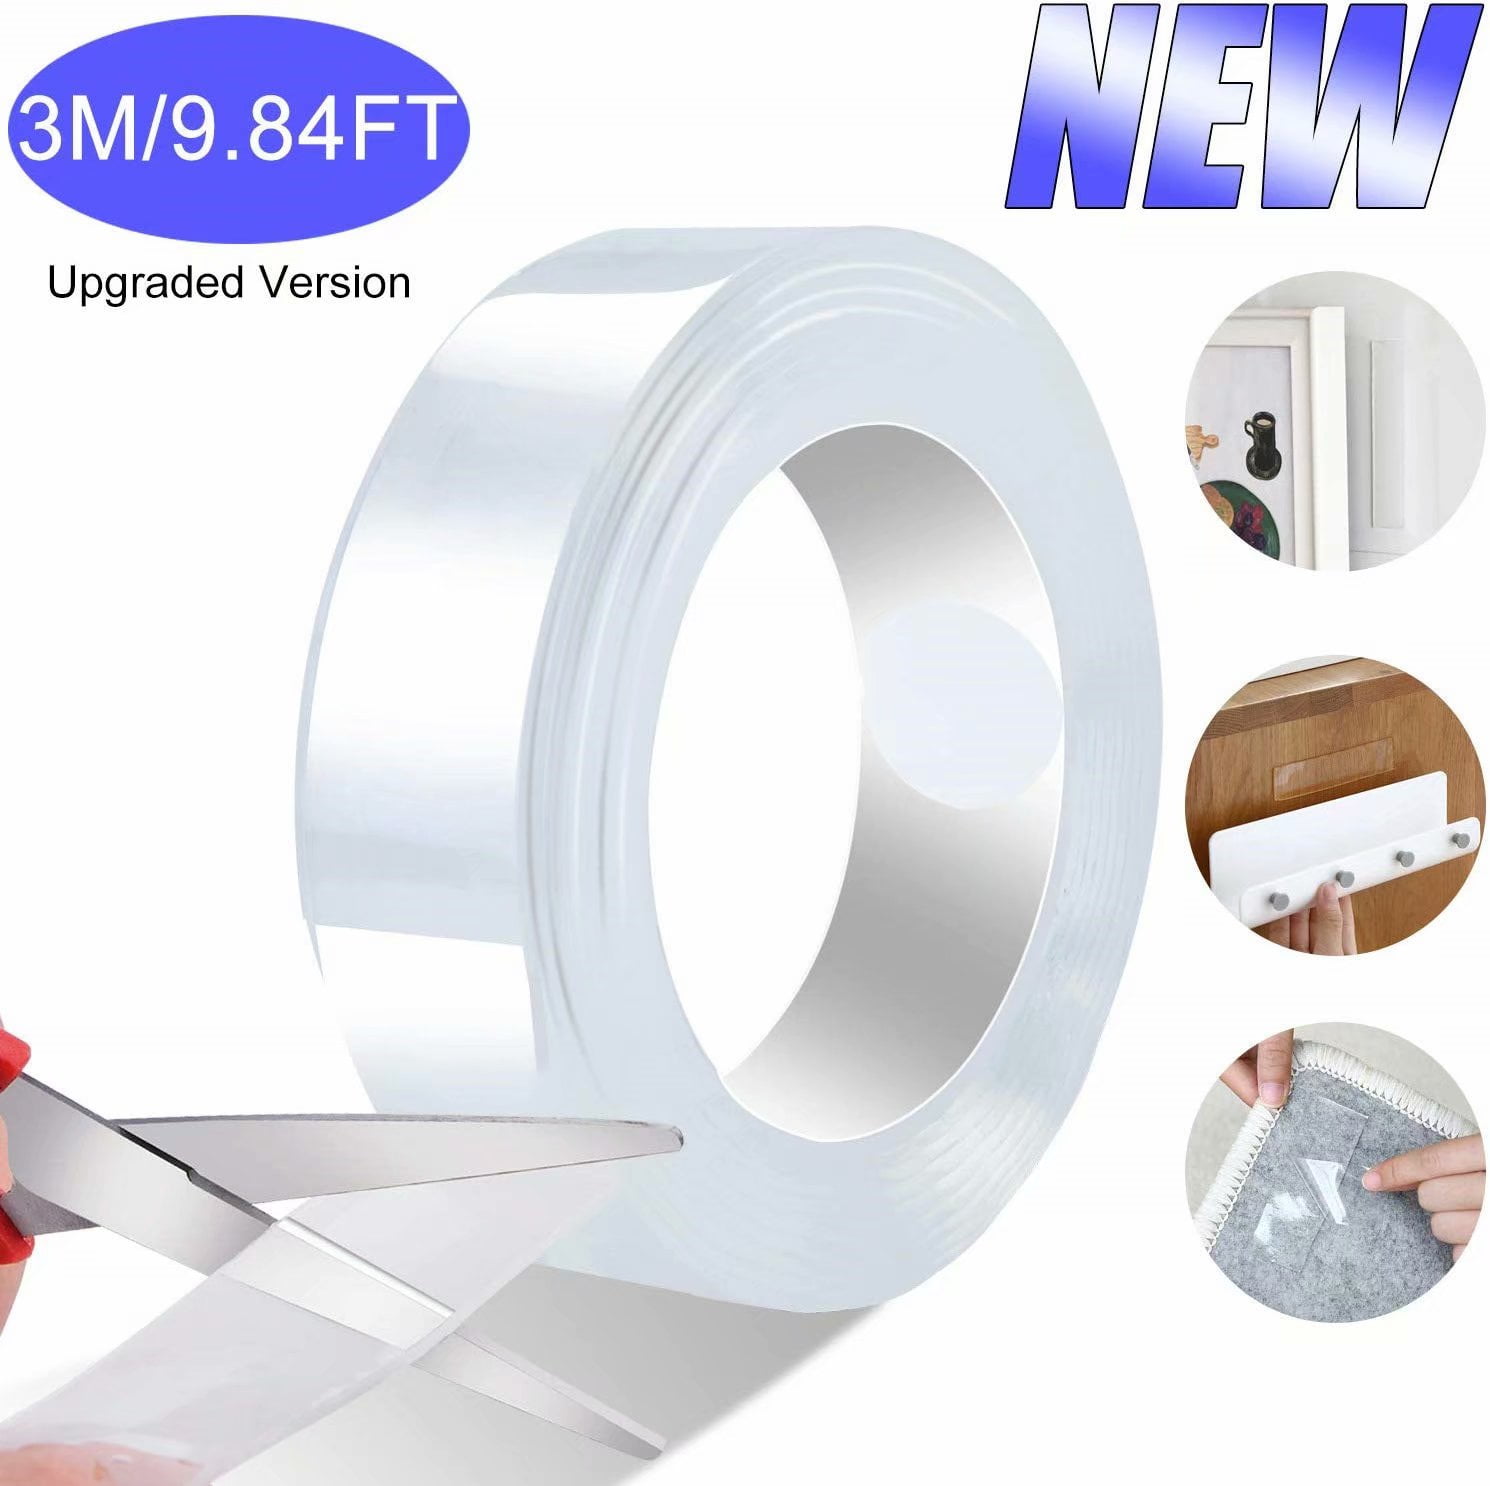 9.84 FT Double Sided Adhesive Nano Tape,Transparent Strong Washable Adhesive Traceless Gel Tape,Removable and Reusable Sticky Anti Slip Tape for Home,Wall,Room,Office Decor